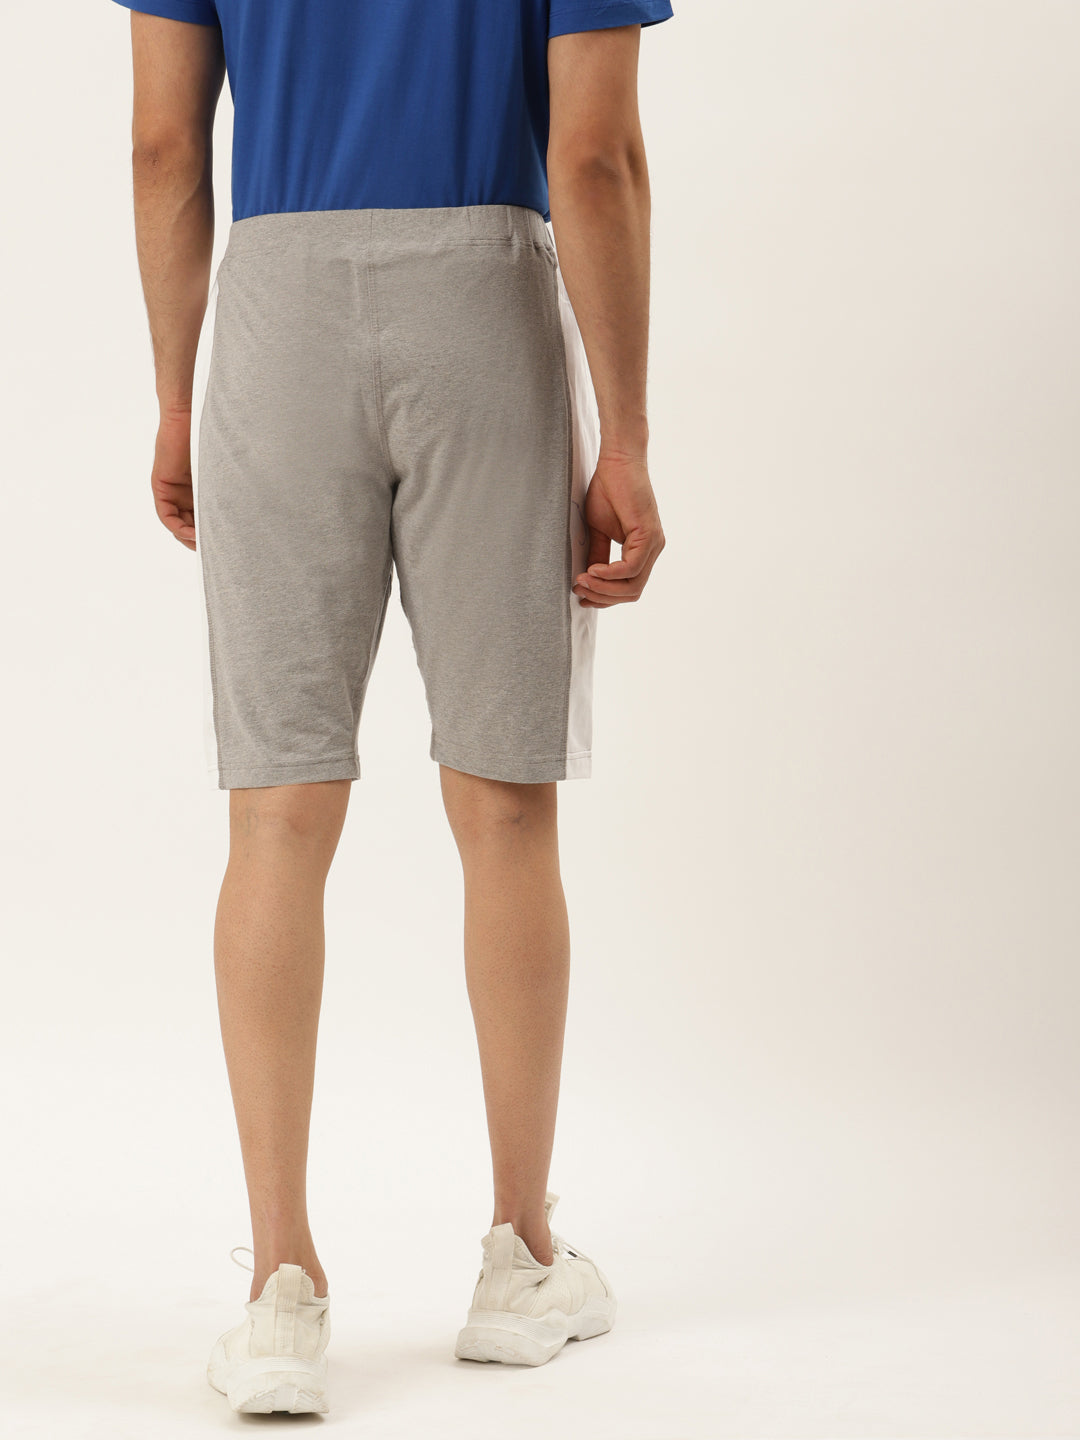 MENS COTTON RICH LYCRA WITH CONTRAST TAPE SHORTS